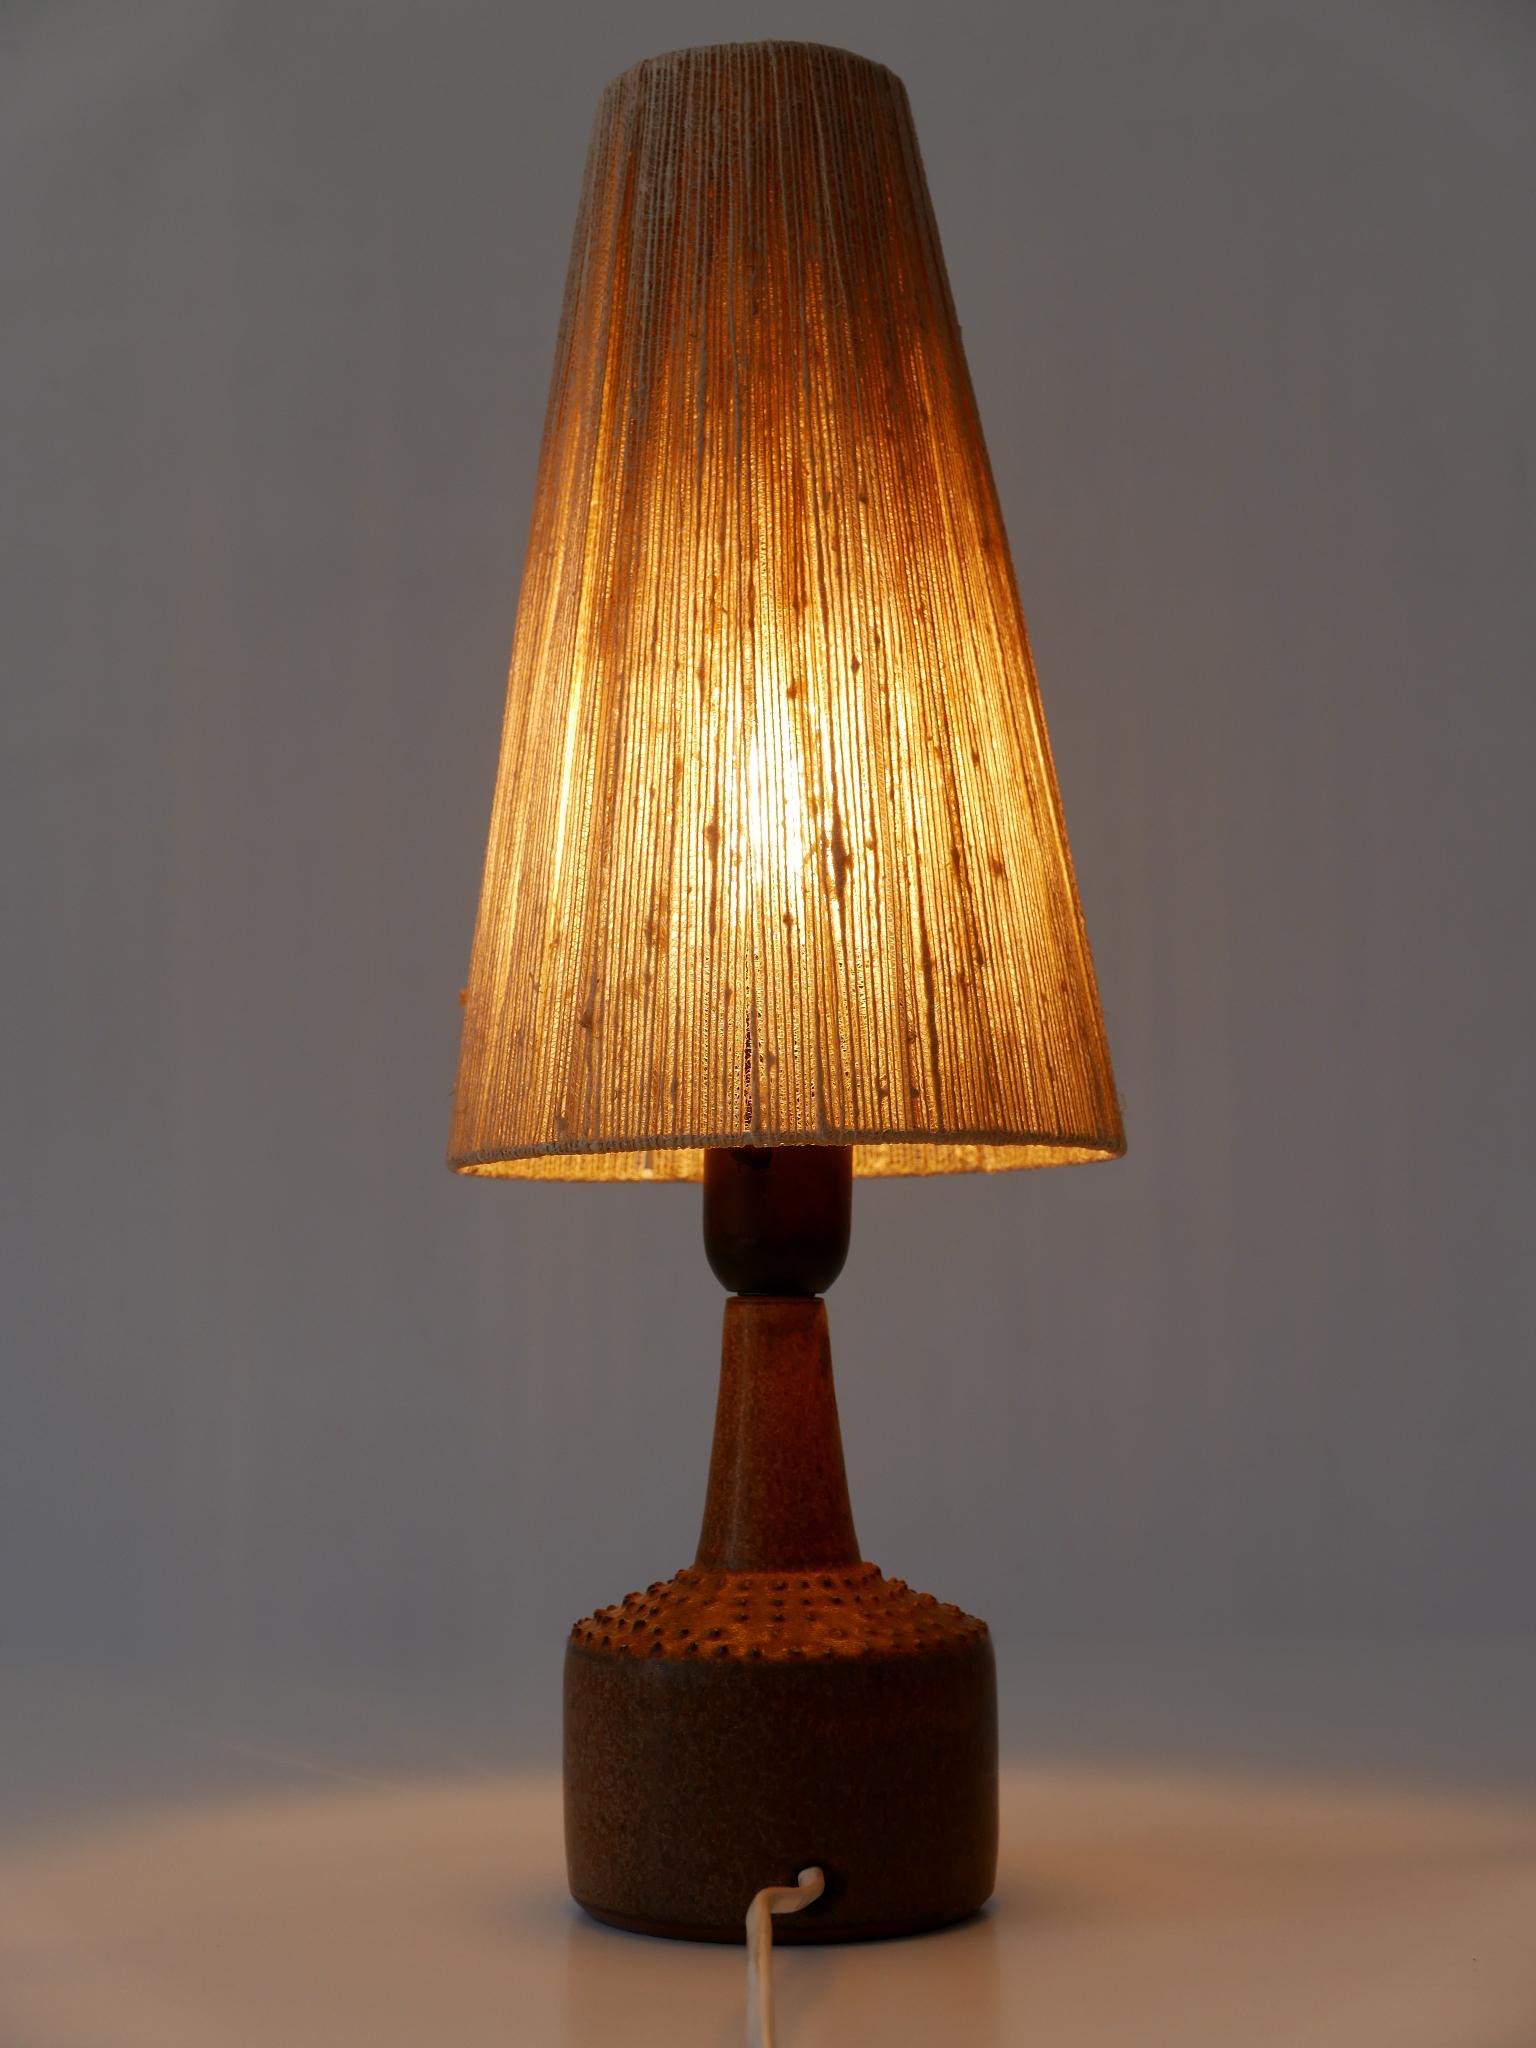 Rare Mid-Century Glazed Stoneware Table Lamp by Rolf Palm for Mölle Sweden 1962 3